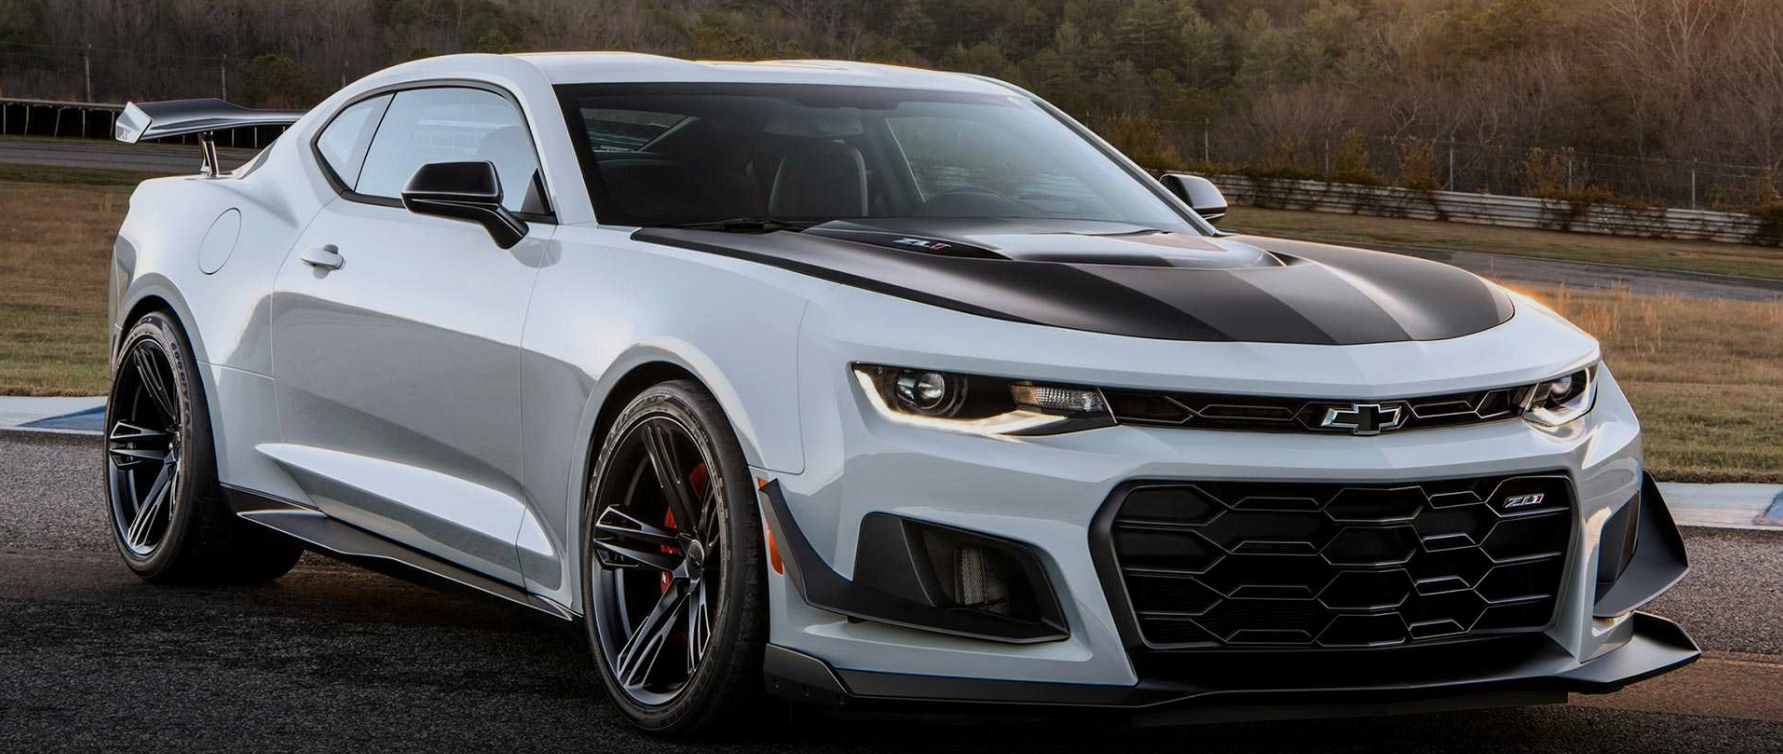 2019 Chevrolet Camaro Coupe Configurations Camaro Packages Az Valley Chevy